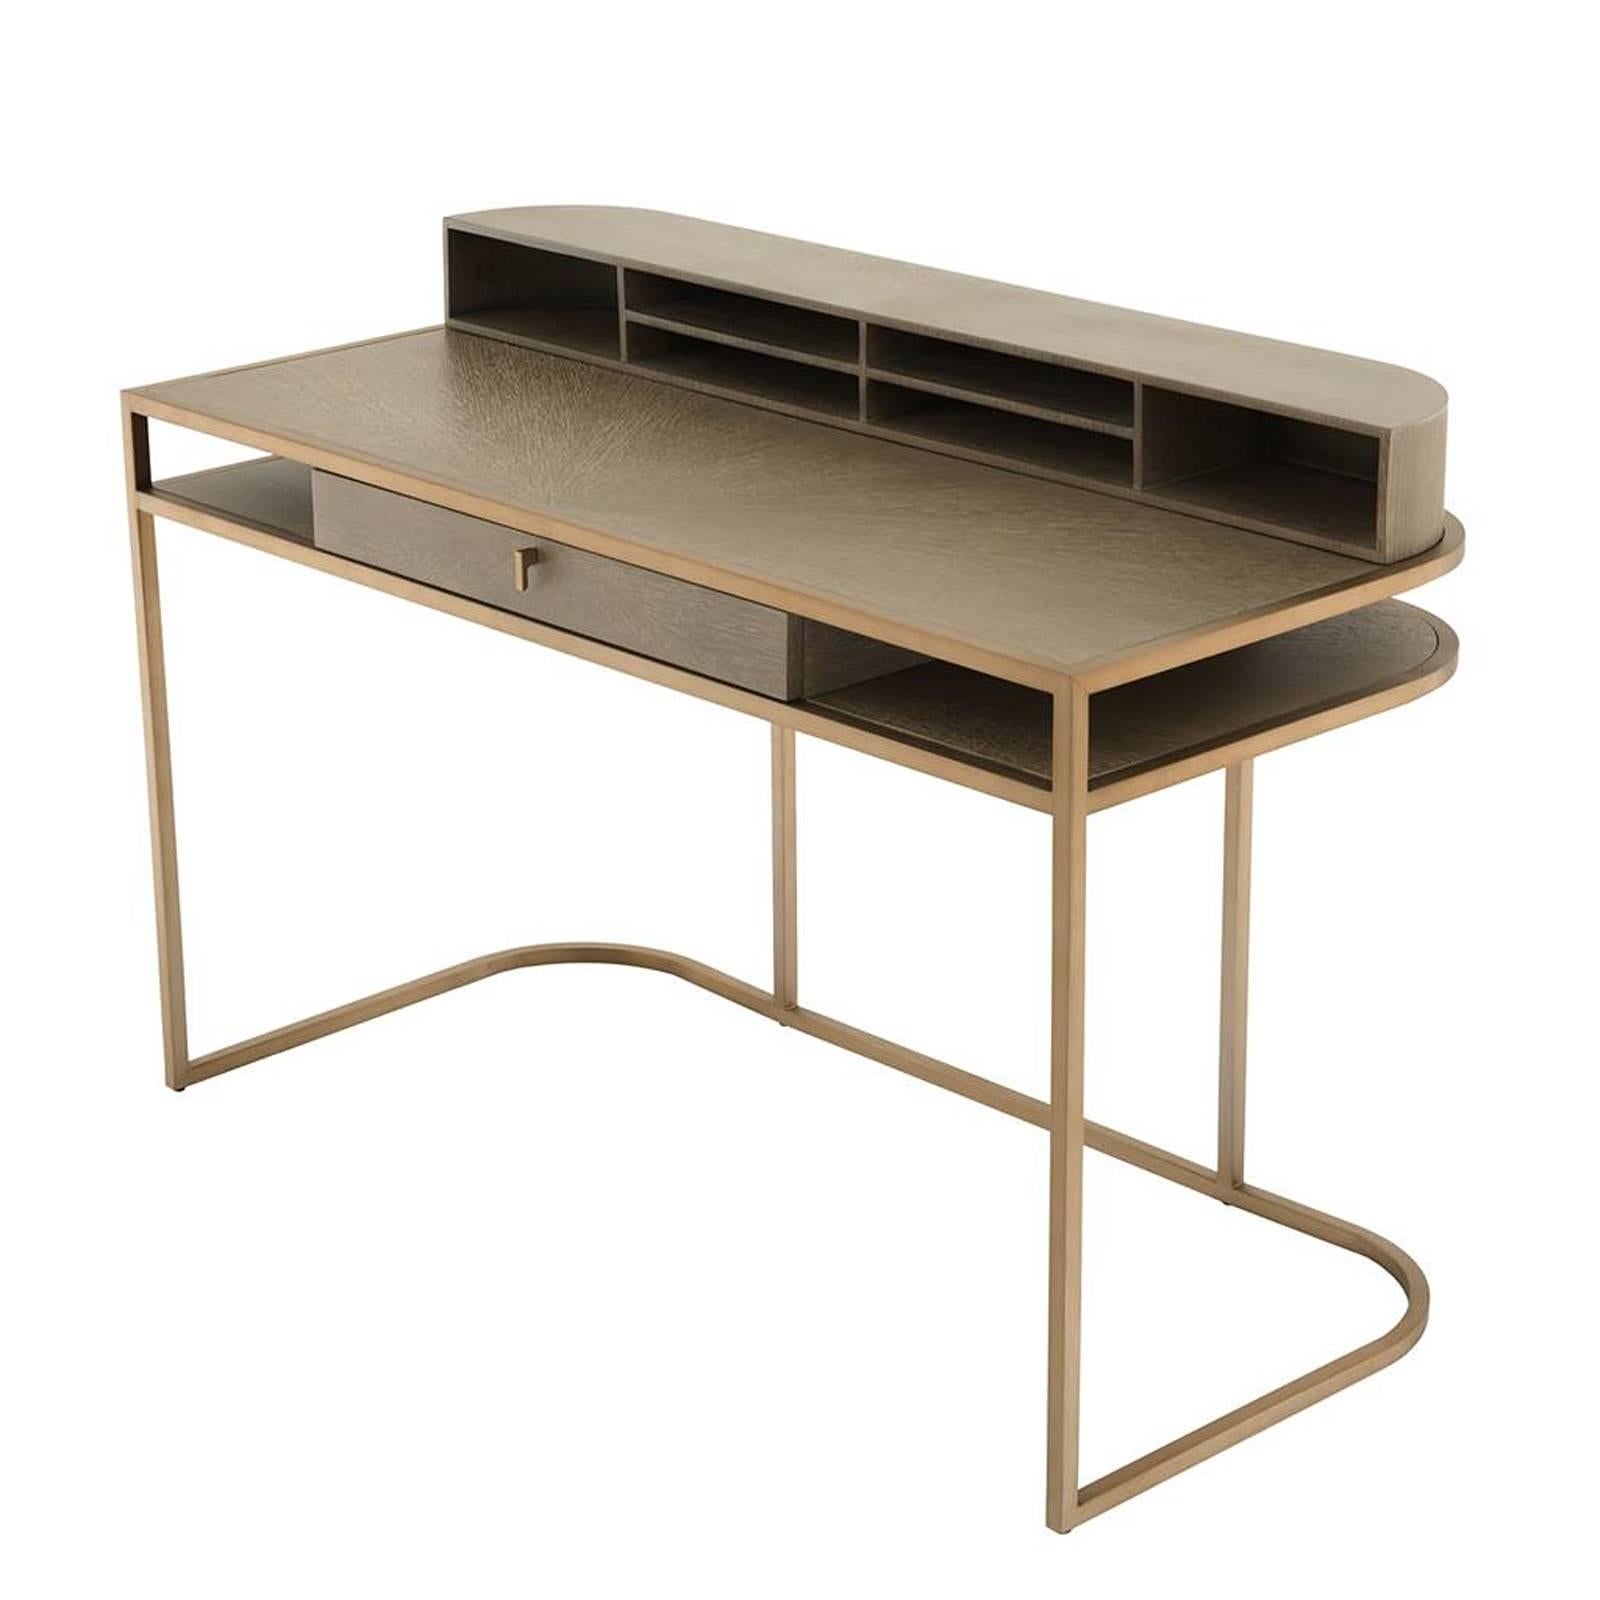 Desk catalaga made in washed oak veneer. 
Structure in brushed brass finish. With 1 drawer.
Desk in: L130xD60xH75cm, 
Shelf part in: L126xD18xH12cm.

   